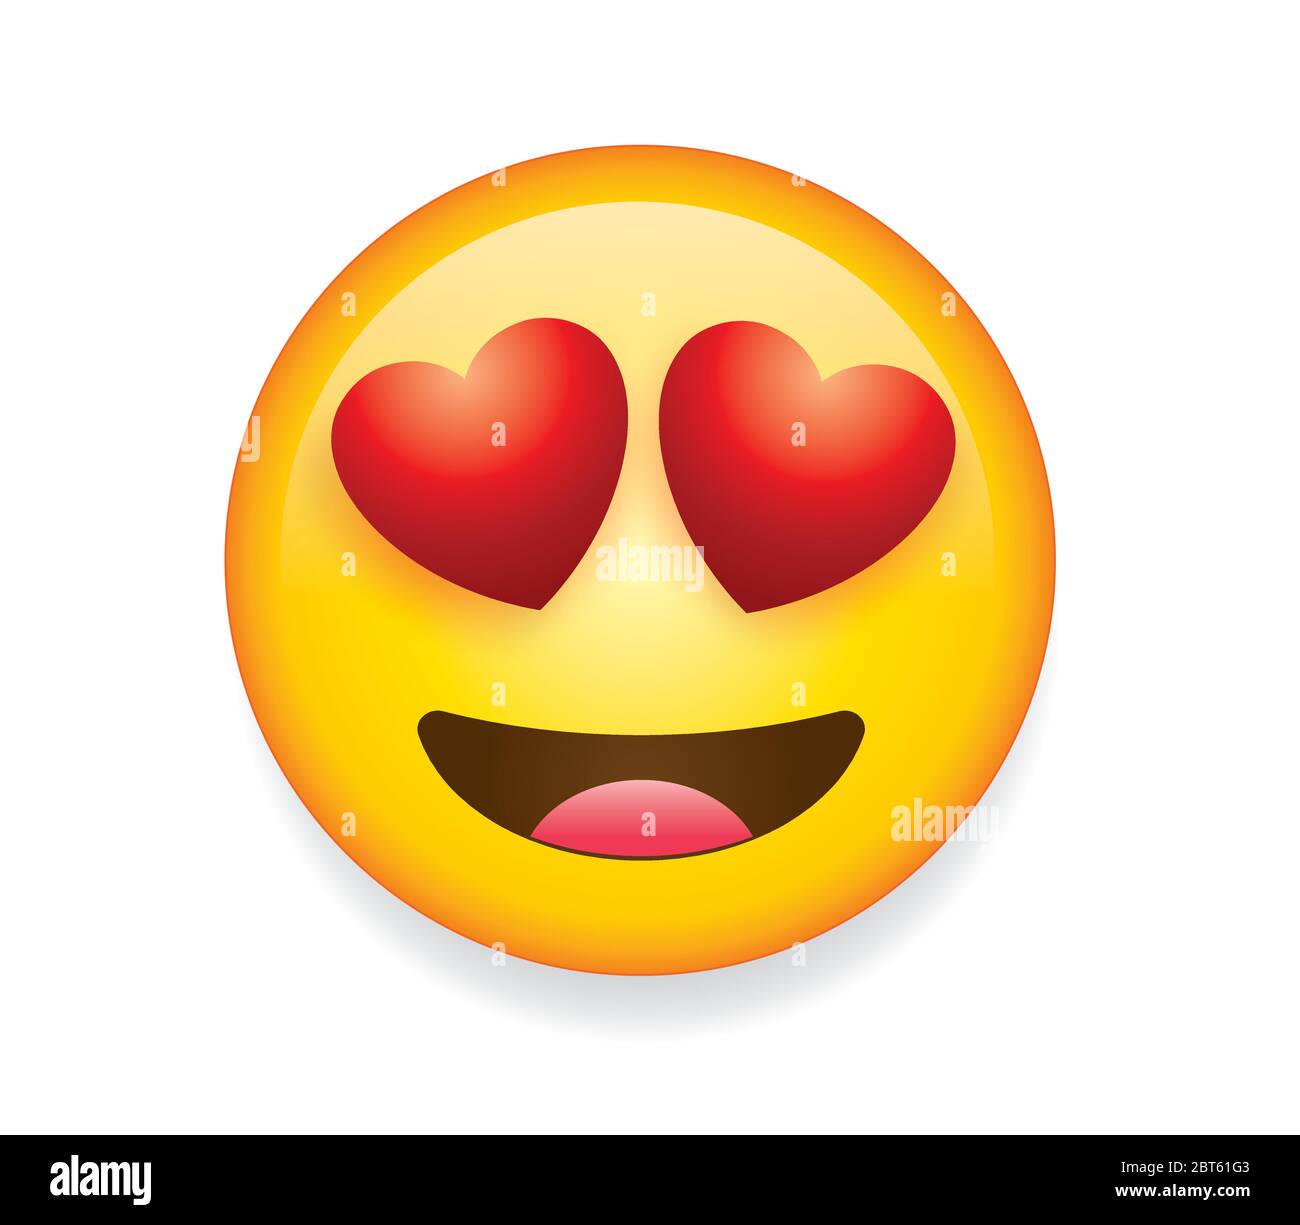 High Quality Emoticon Smiling Love Emoji Isolated On White Background Yellow Face Emoji With Red Heart Eyes And Smile Vector Illustration Stock Vector Image Art Alamy